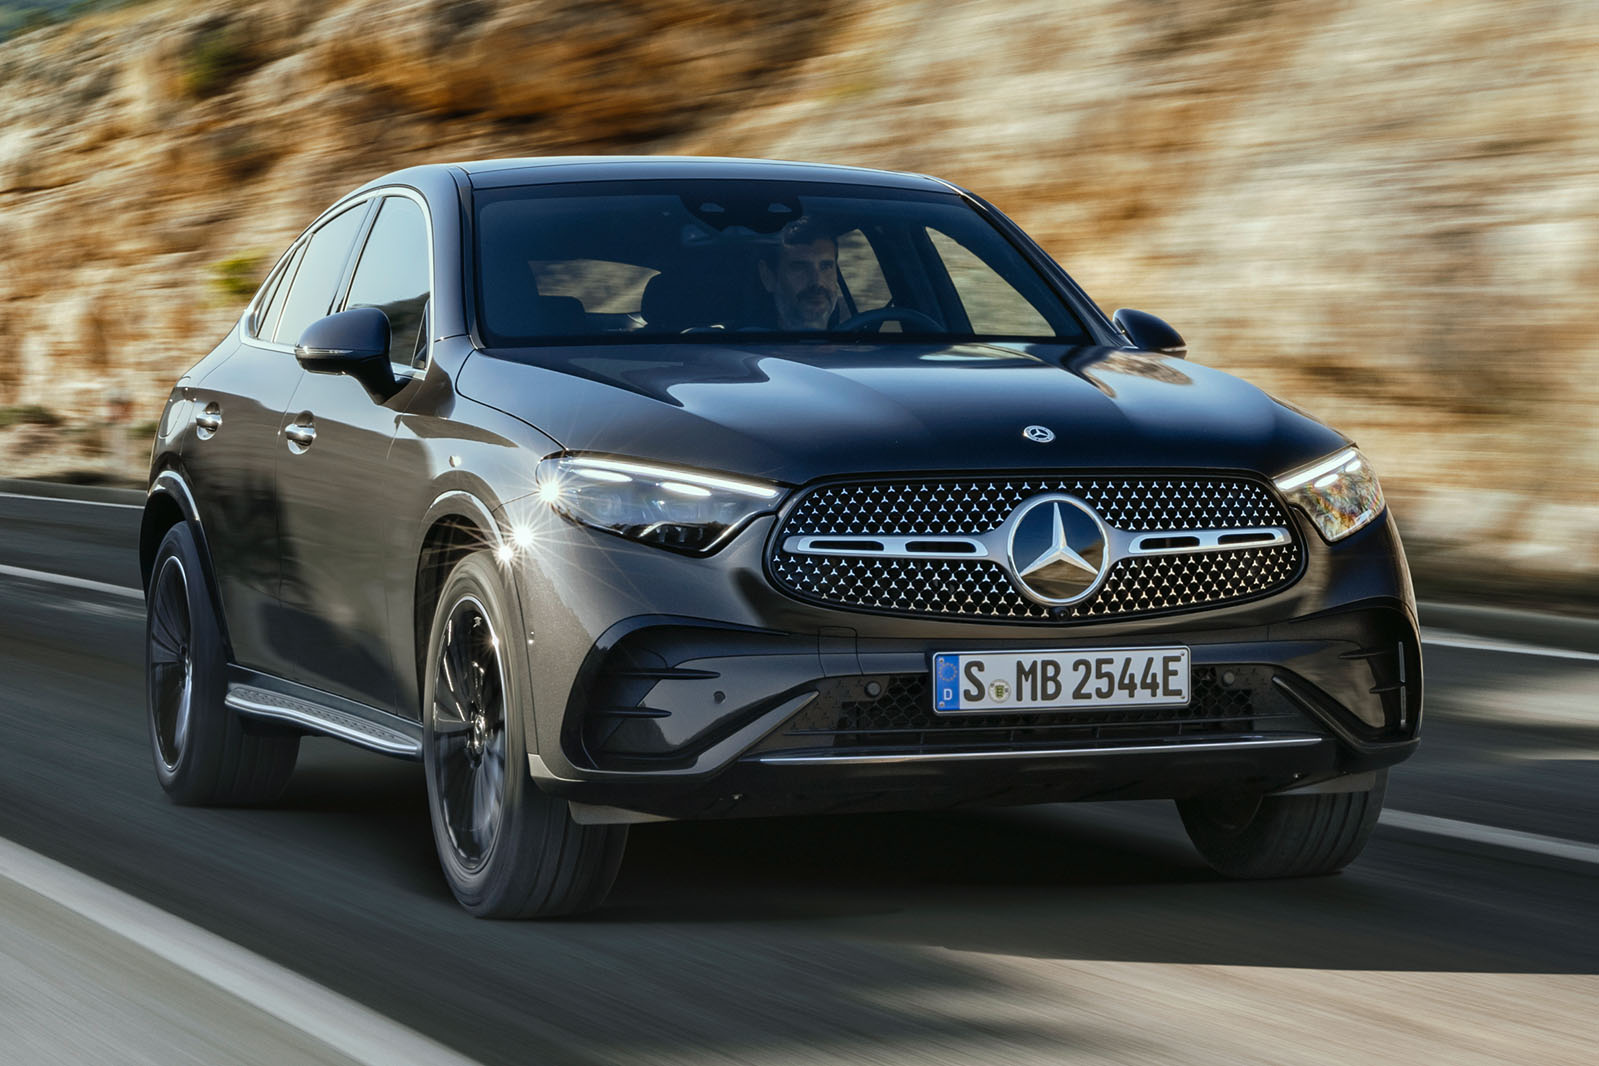 https://www.autocar.co.uk/sites/autocar.co.uk/files/images/car-reviews/first-drives/legacy/mercedes-benz-glc-coupe-driving-front-3_4.jpg